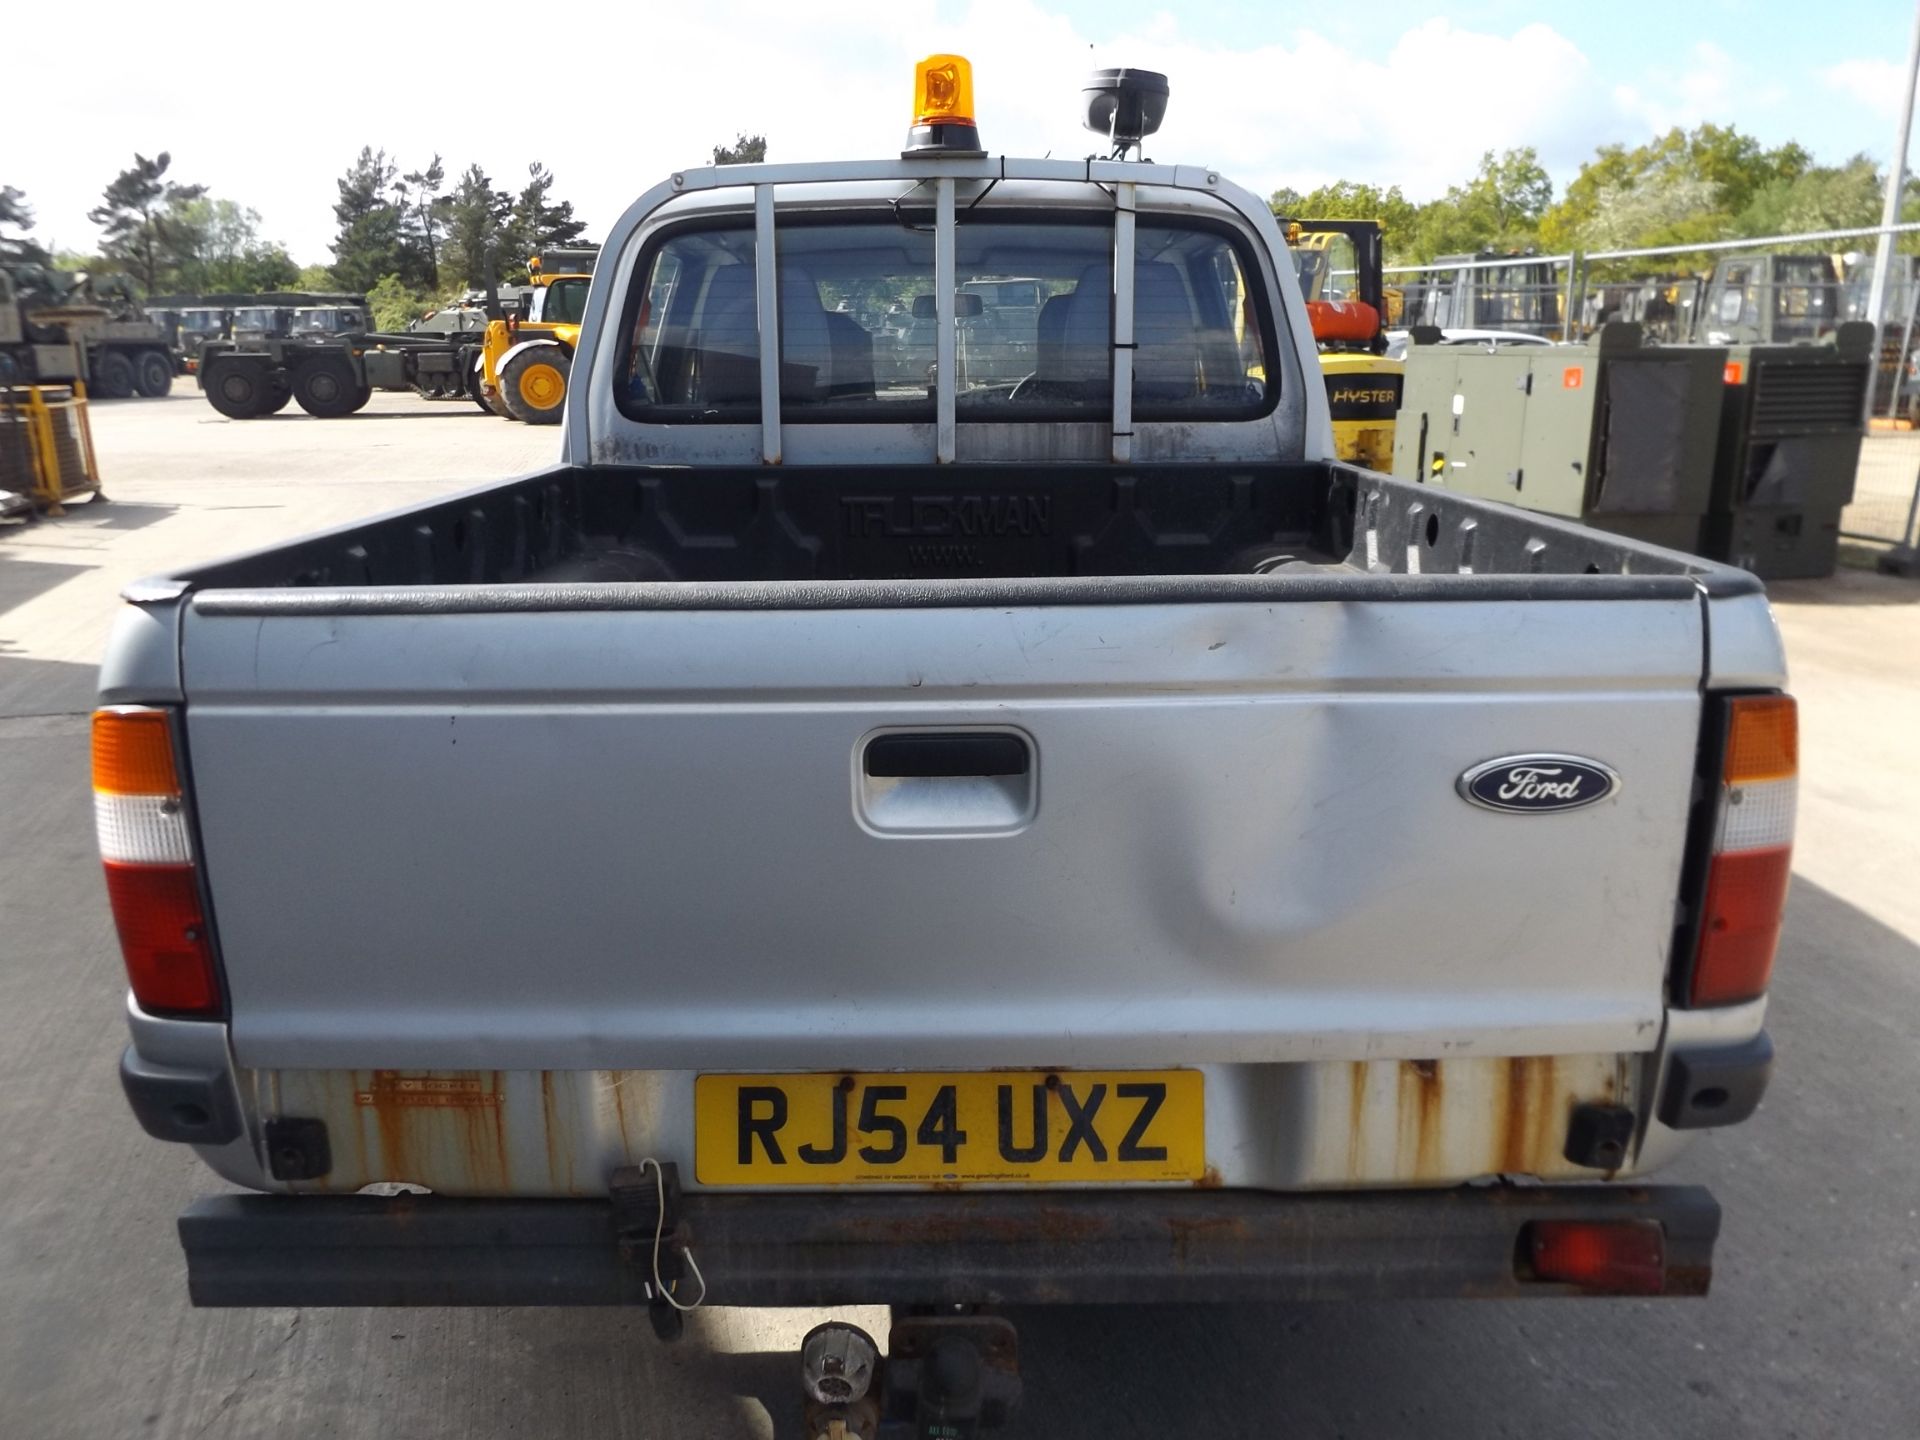 Ford Ranger Double cab pick up - Image 7 of 15